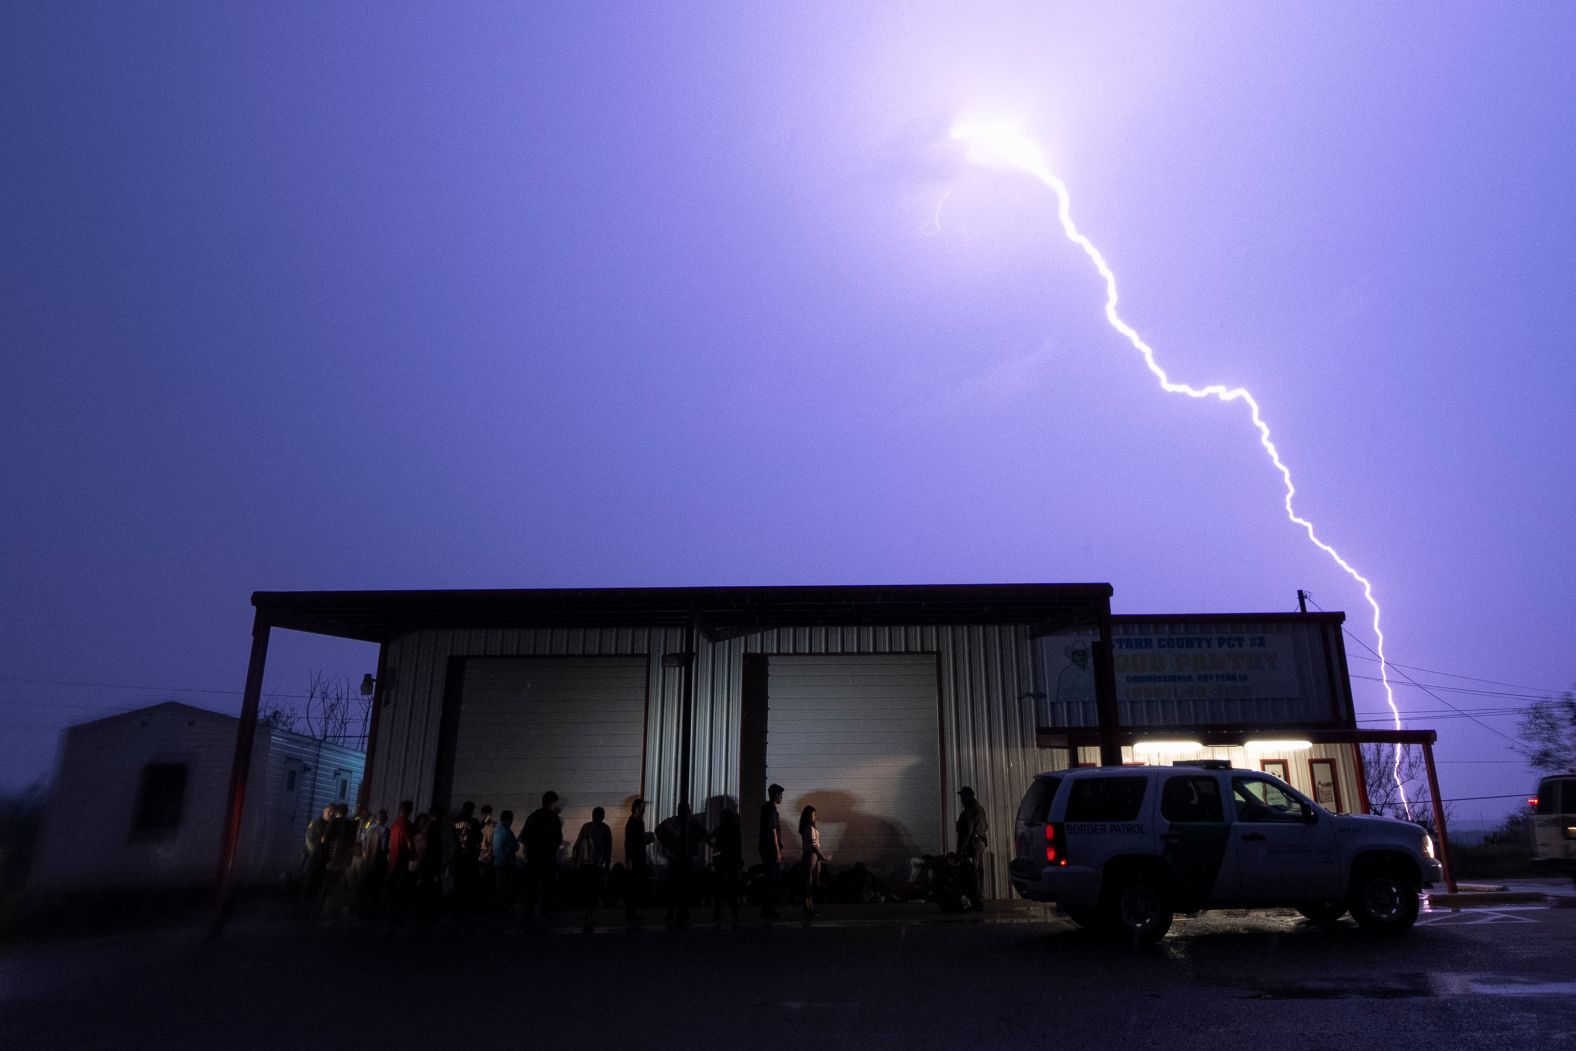 A lightning bolt is seen in the sky as migrants line up for processing in Fronton, Texas, on Saturday, May 13. The migrants had just crossed the US-Mexico border. The expiration of the border restriction policy known as Title 42 has so far brought <a href="index.php?page=&url=https%3A%2F%2Fwww.cnn.com%2F2023%2F05%2F14%2Fus%2Ftitle-42-border-immigration-sunday%2Findex.html" target="_blank">fewer migrant arrivals than expected</a>, but southern border communities still worry about overcrowded facilities for processing and detention.